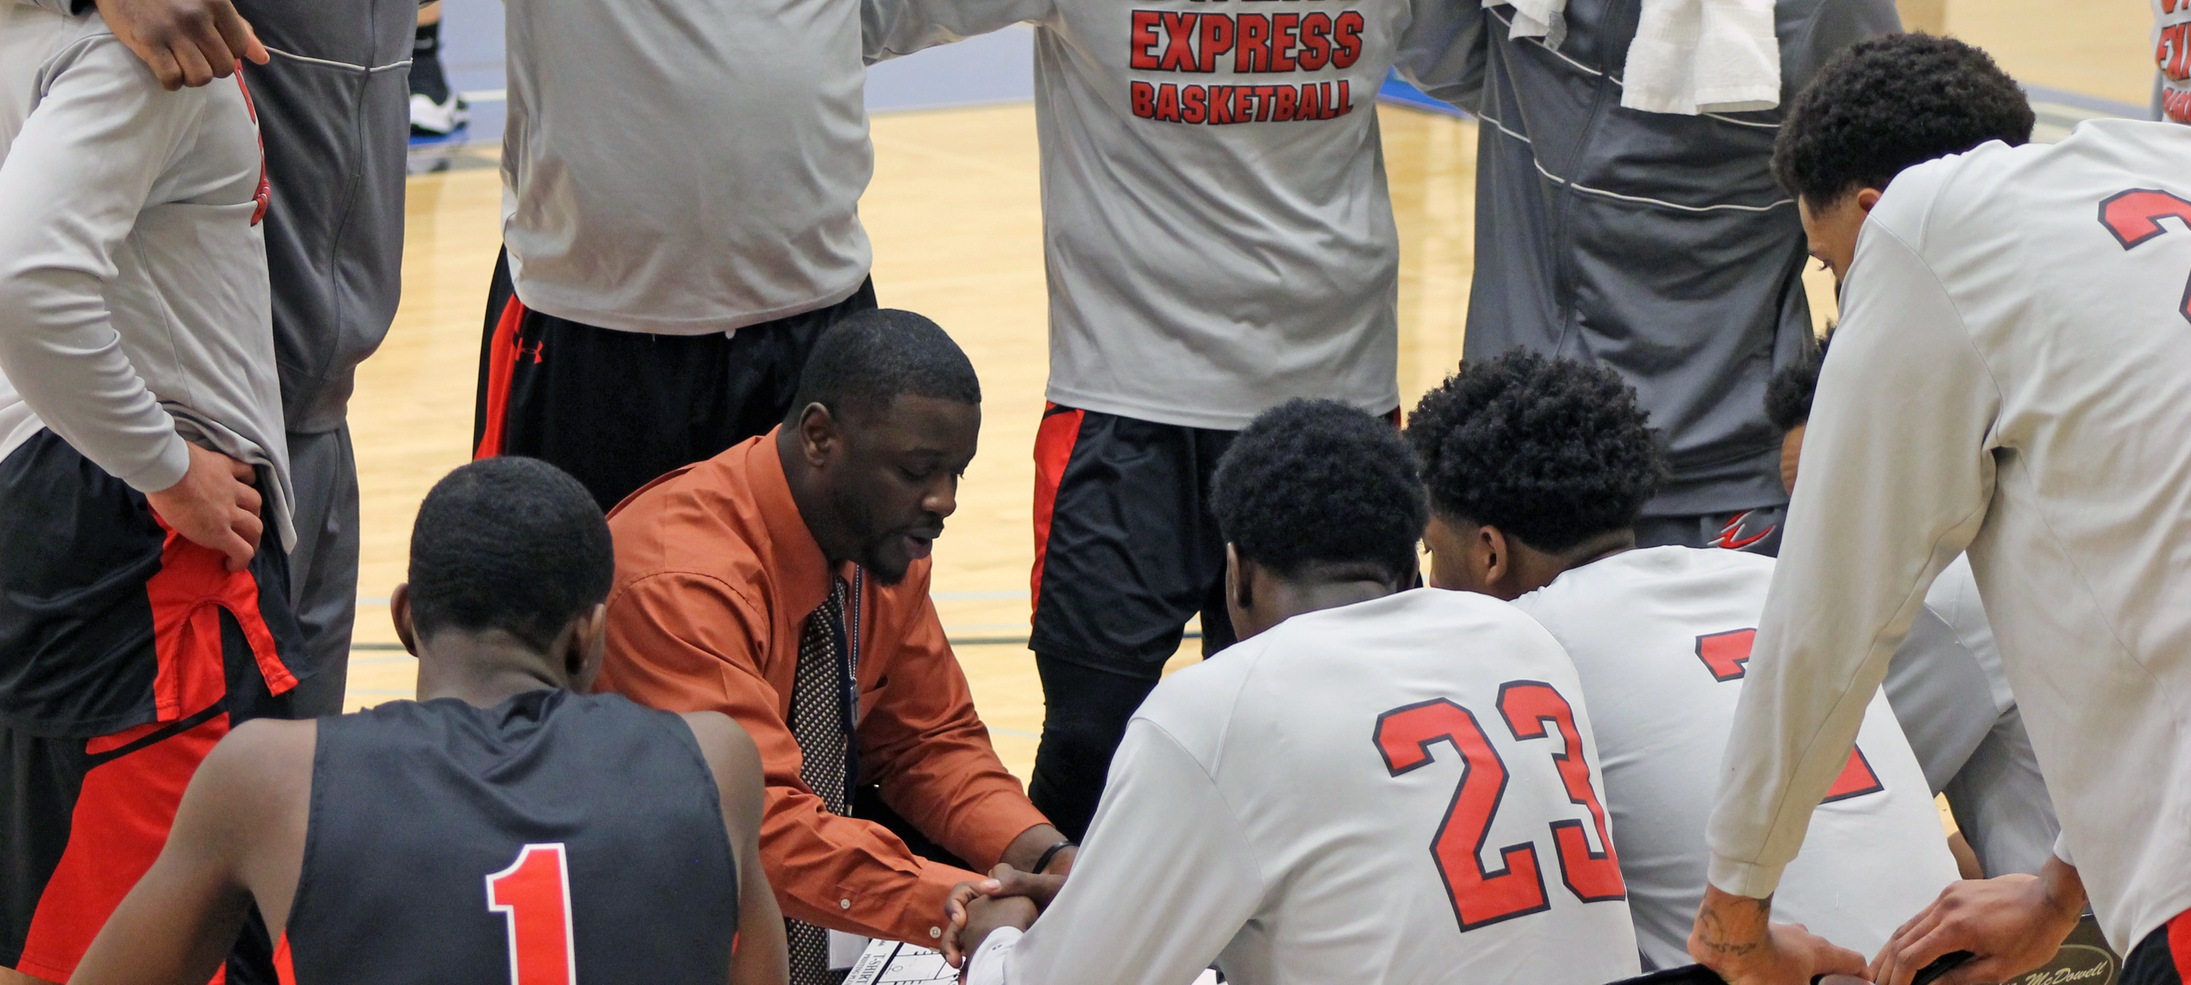 Cuyahoga Too Much Inside, Owens MBB Falls 84-58 In District 11 Semifinal